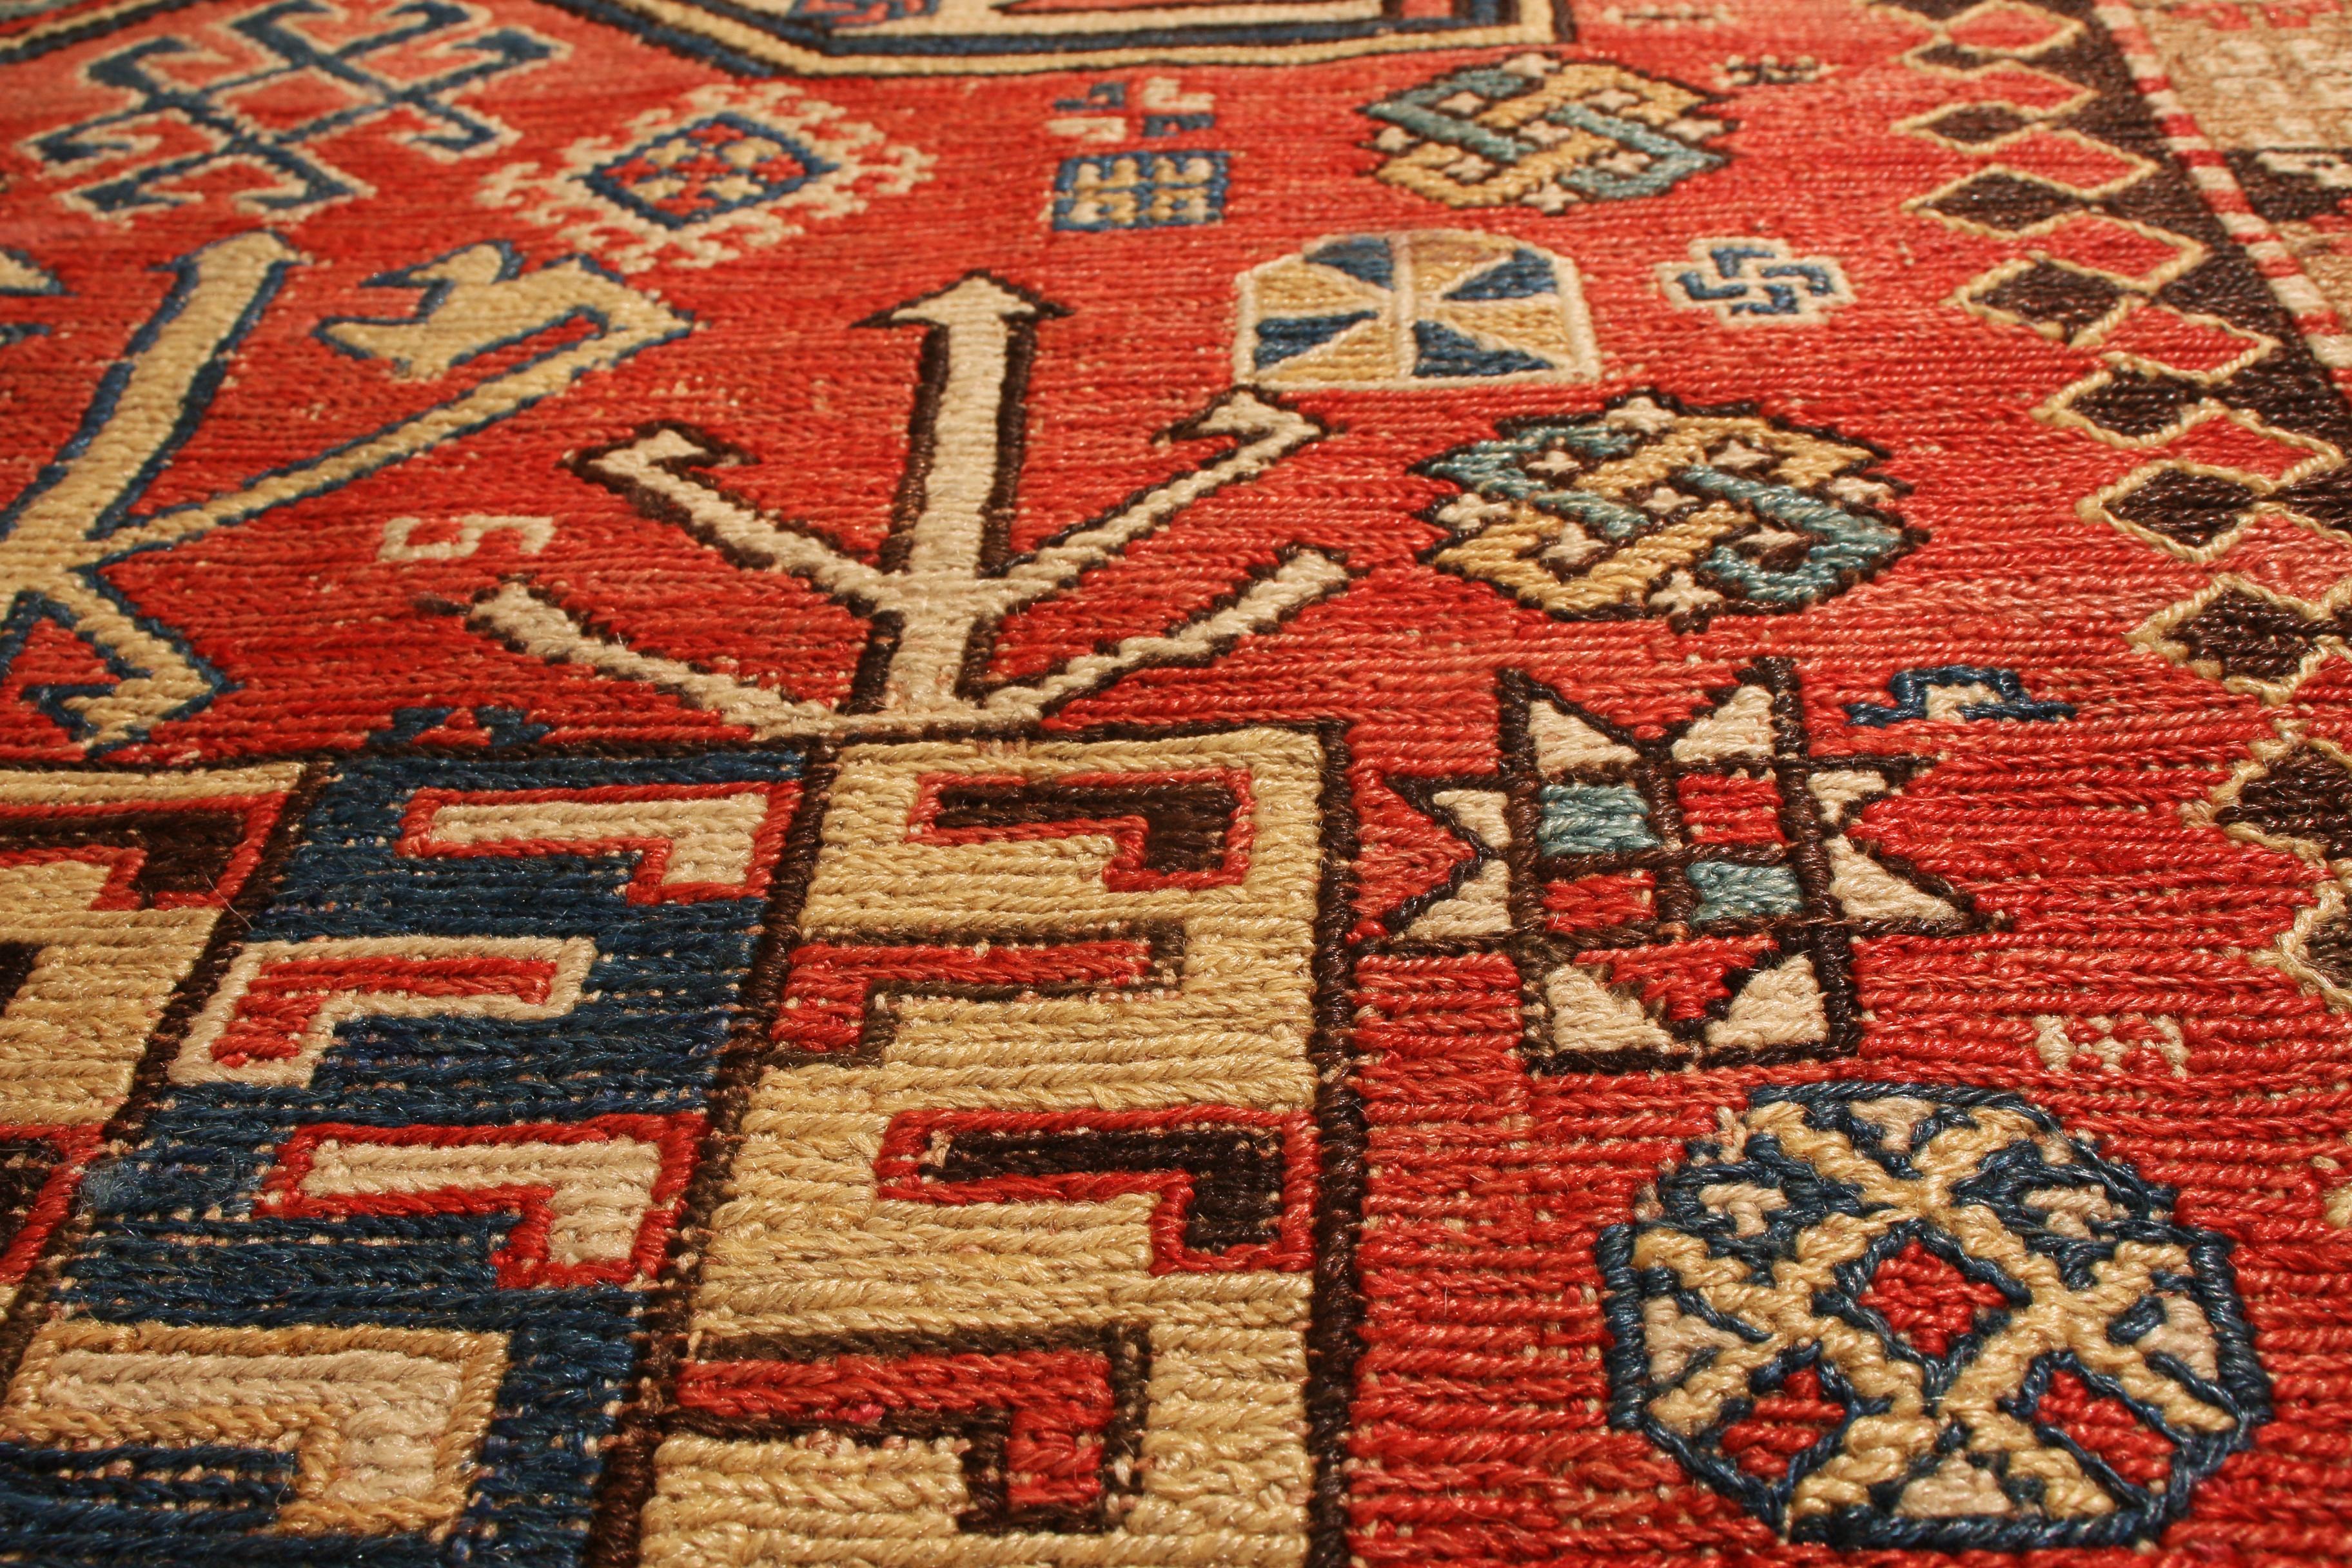 Hand-Knotted Antique Soumak Transitional Geometric Red and Blue Wool Southwestern Pattern Rug